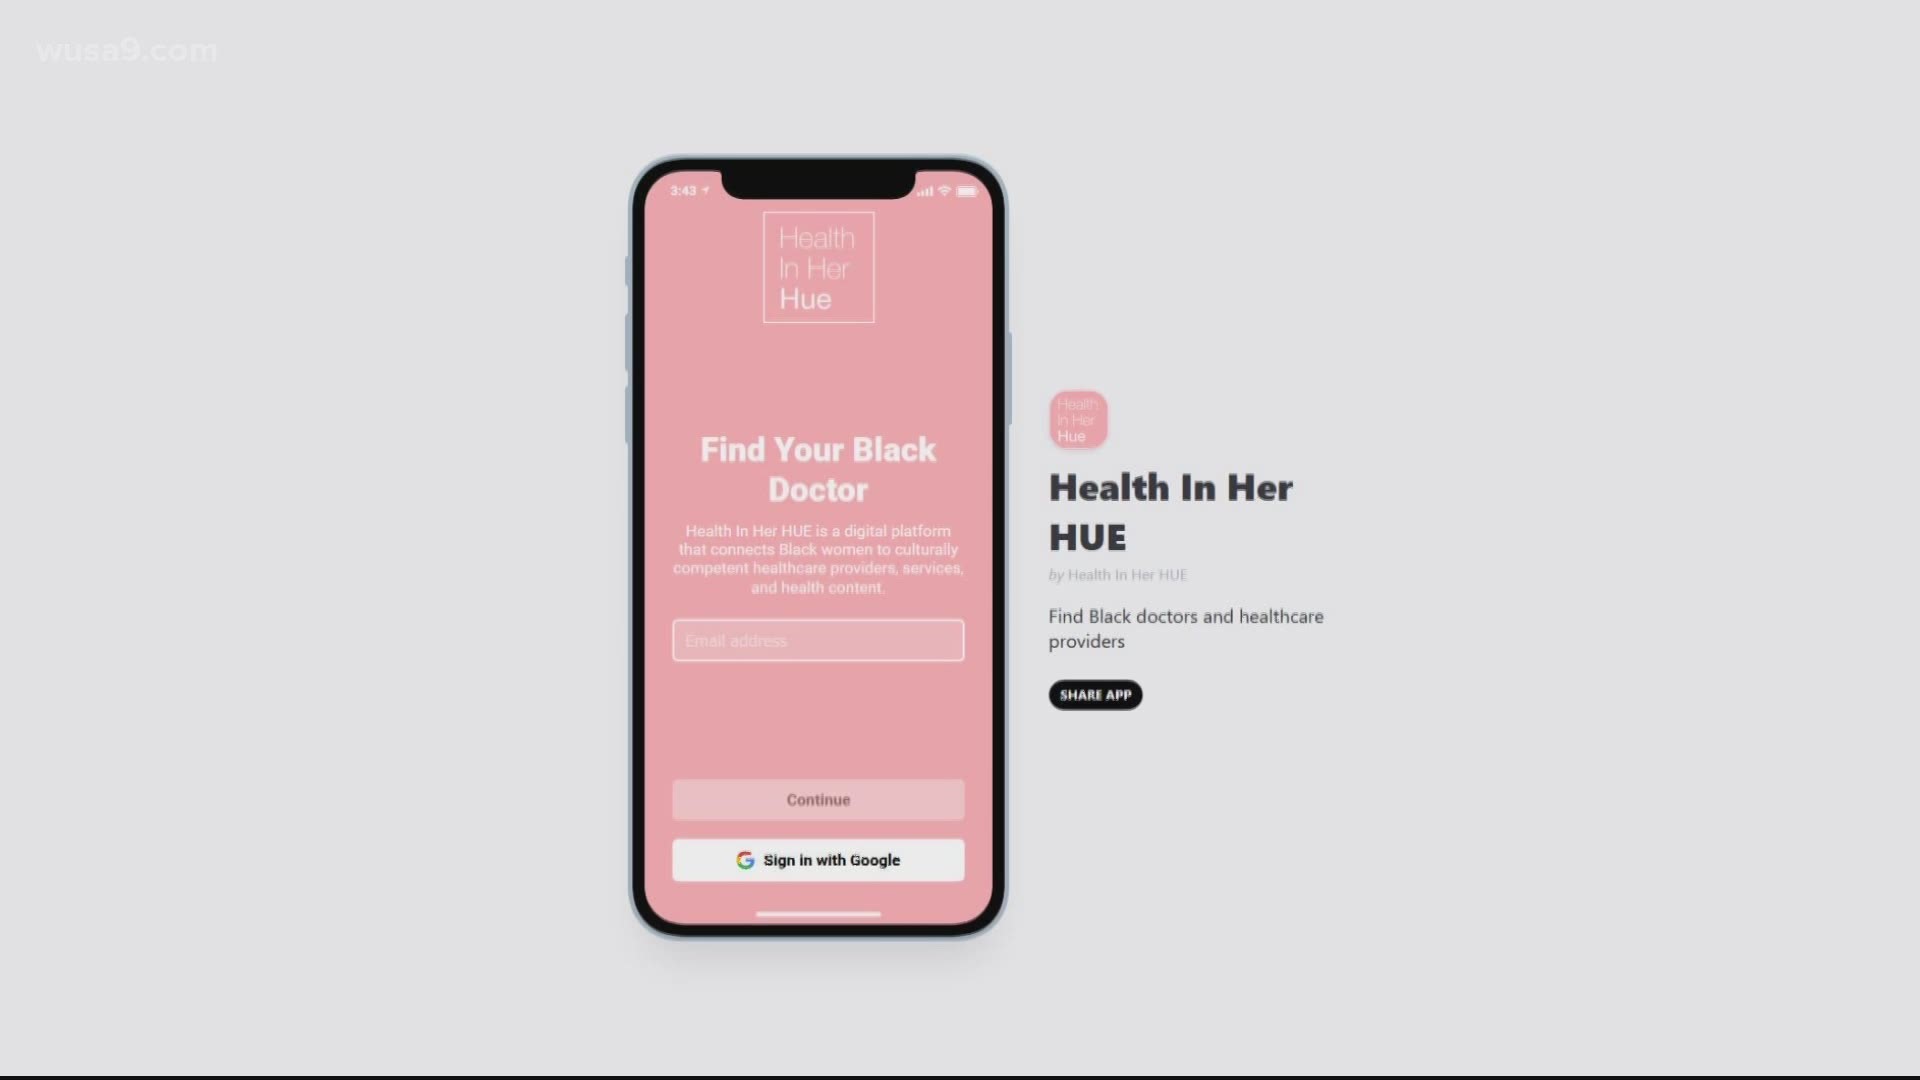 A huge part of racial equality is access to healthcare. Ashlee Wisdom decided to create an app to help women of color get access to healthcare providers